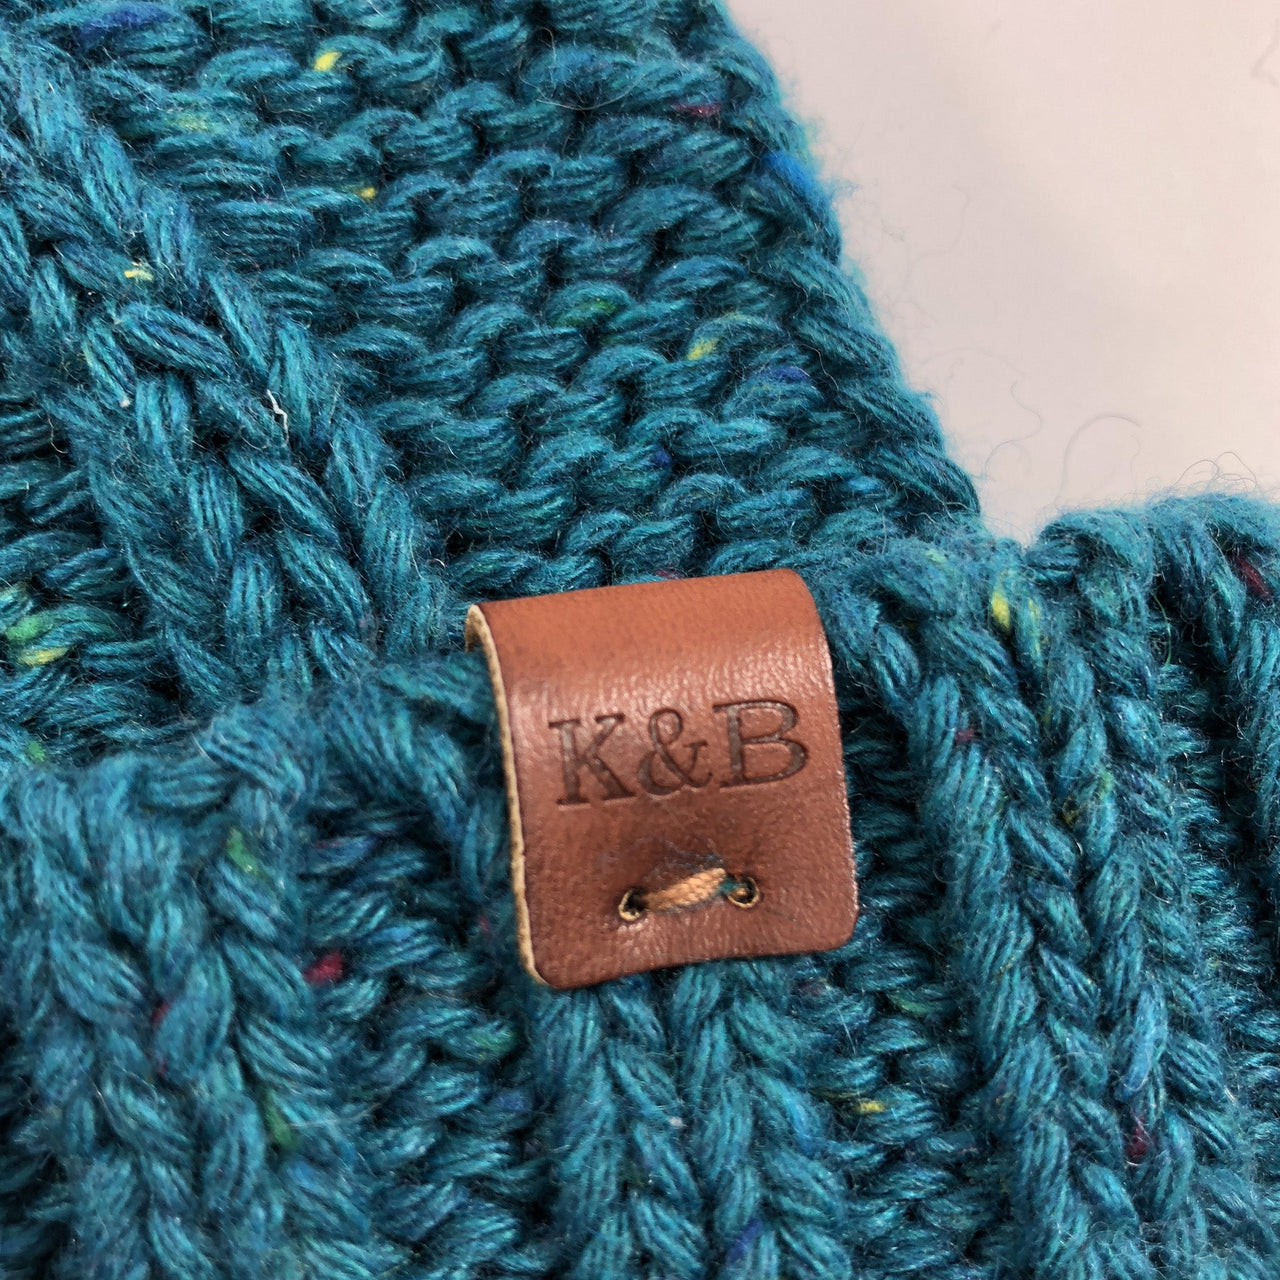 on the raised cuff of the women's teal cable knit beanie is a brown leather kb label